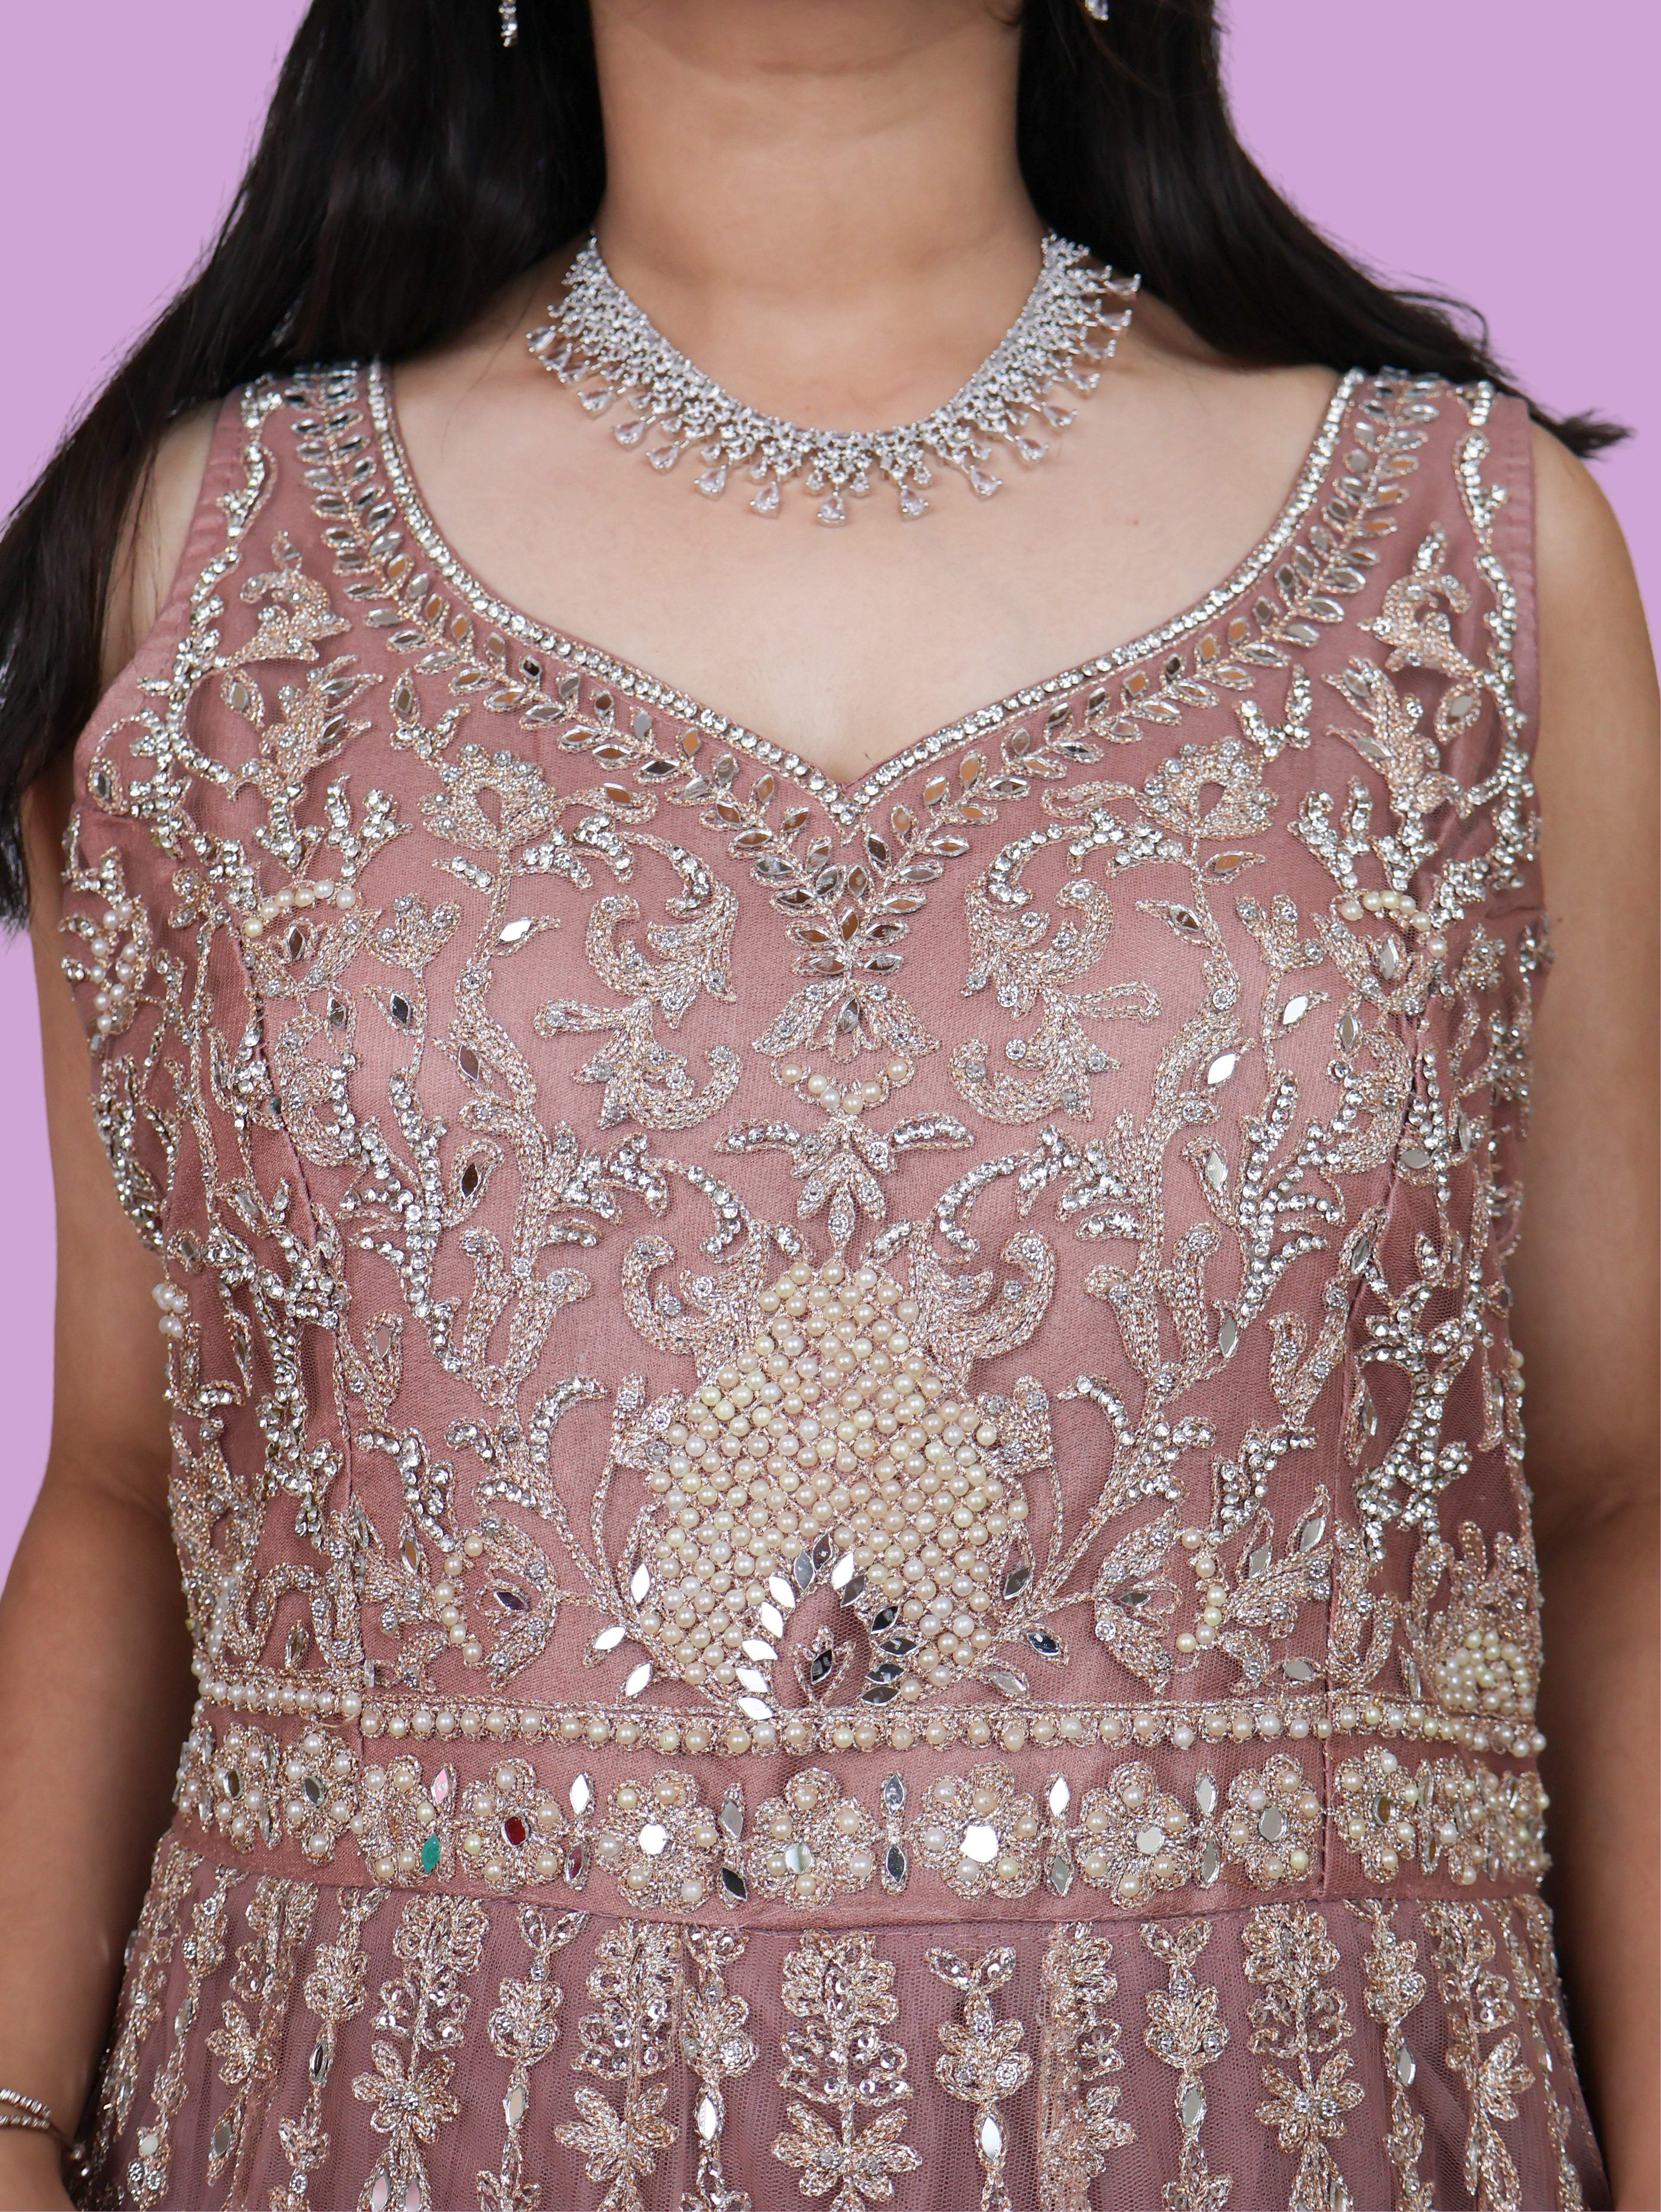 Nude Gown with Stones &amp; Embroidery Work by Shreekama Nude Designer Gowns for Party Festival Wedding Occasion in Noida